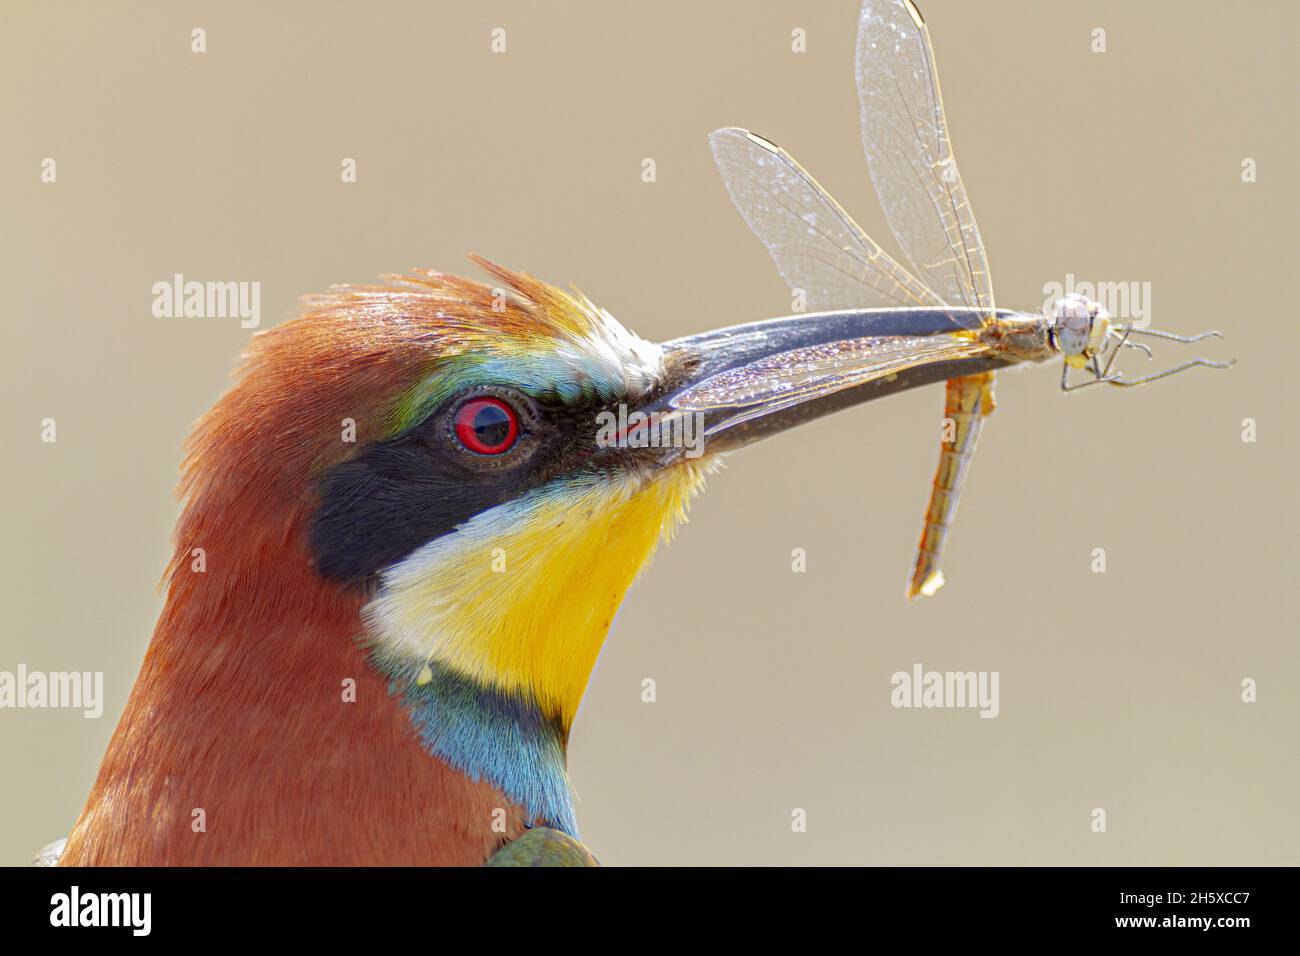 Small bee eater with colorful plumage eating insect in natural habitat Stock Photo